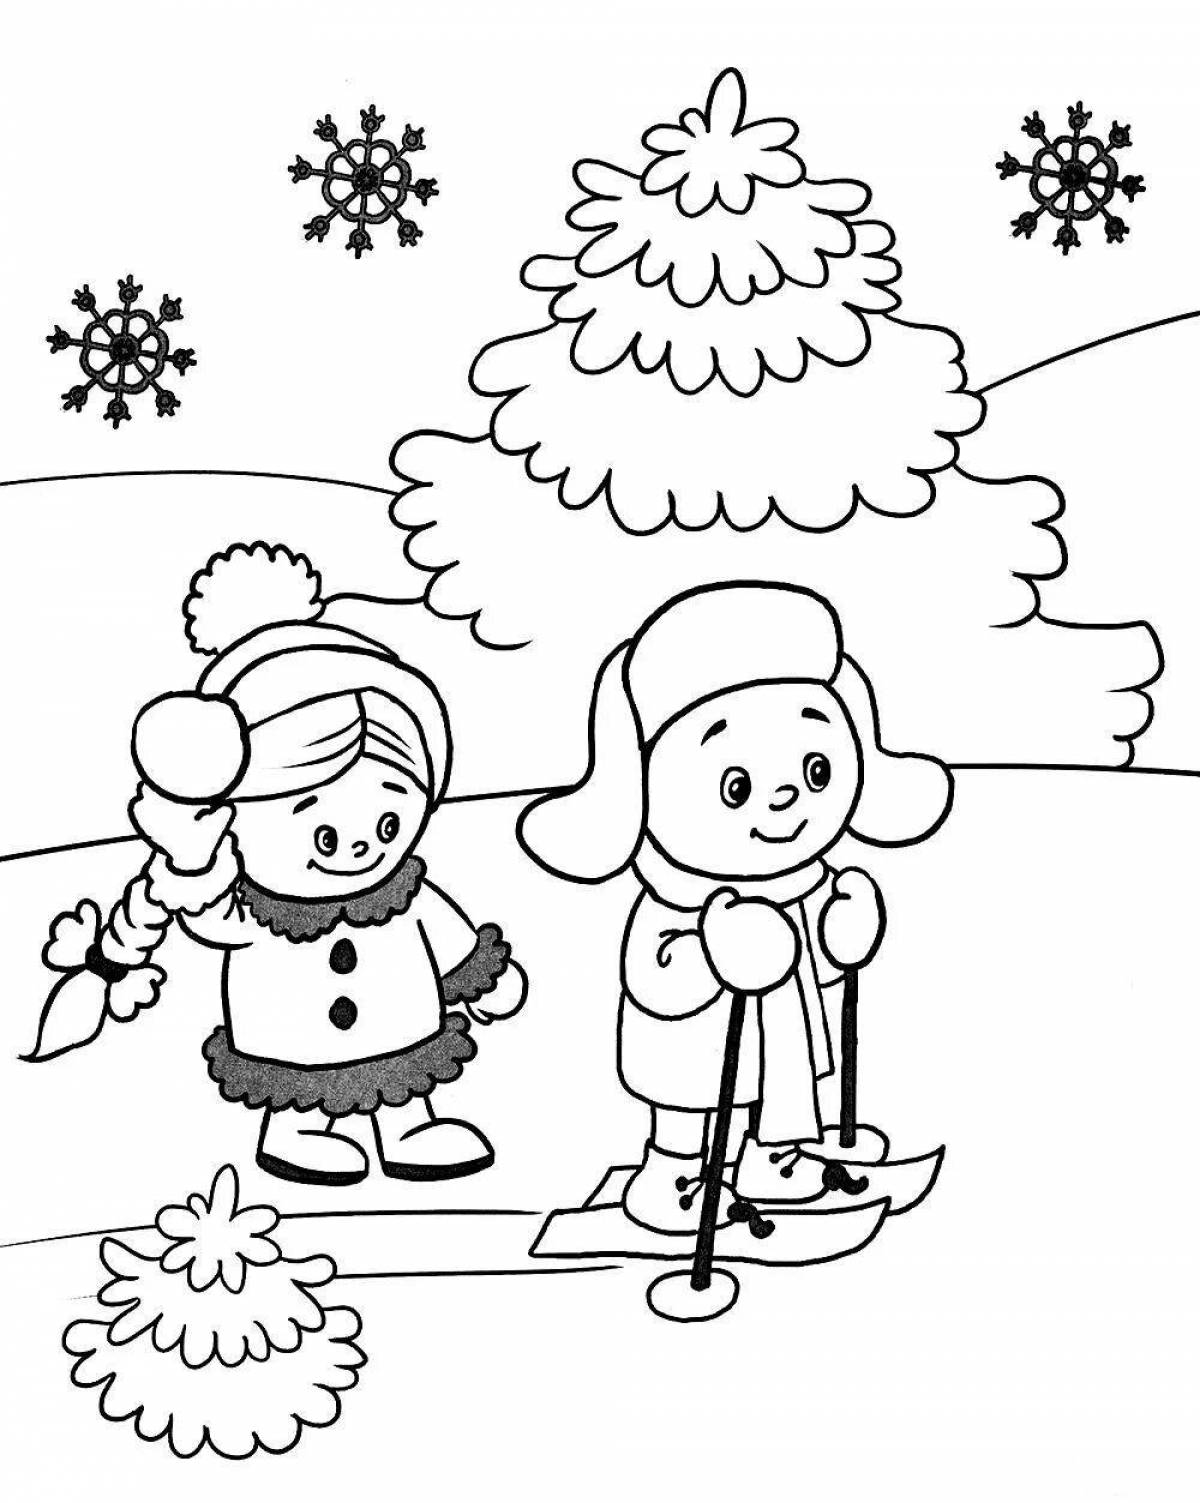 Adorable winter coloring book for kids